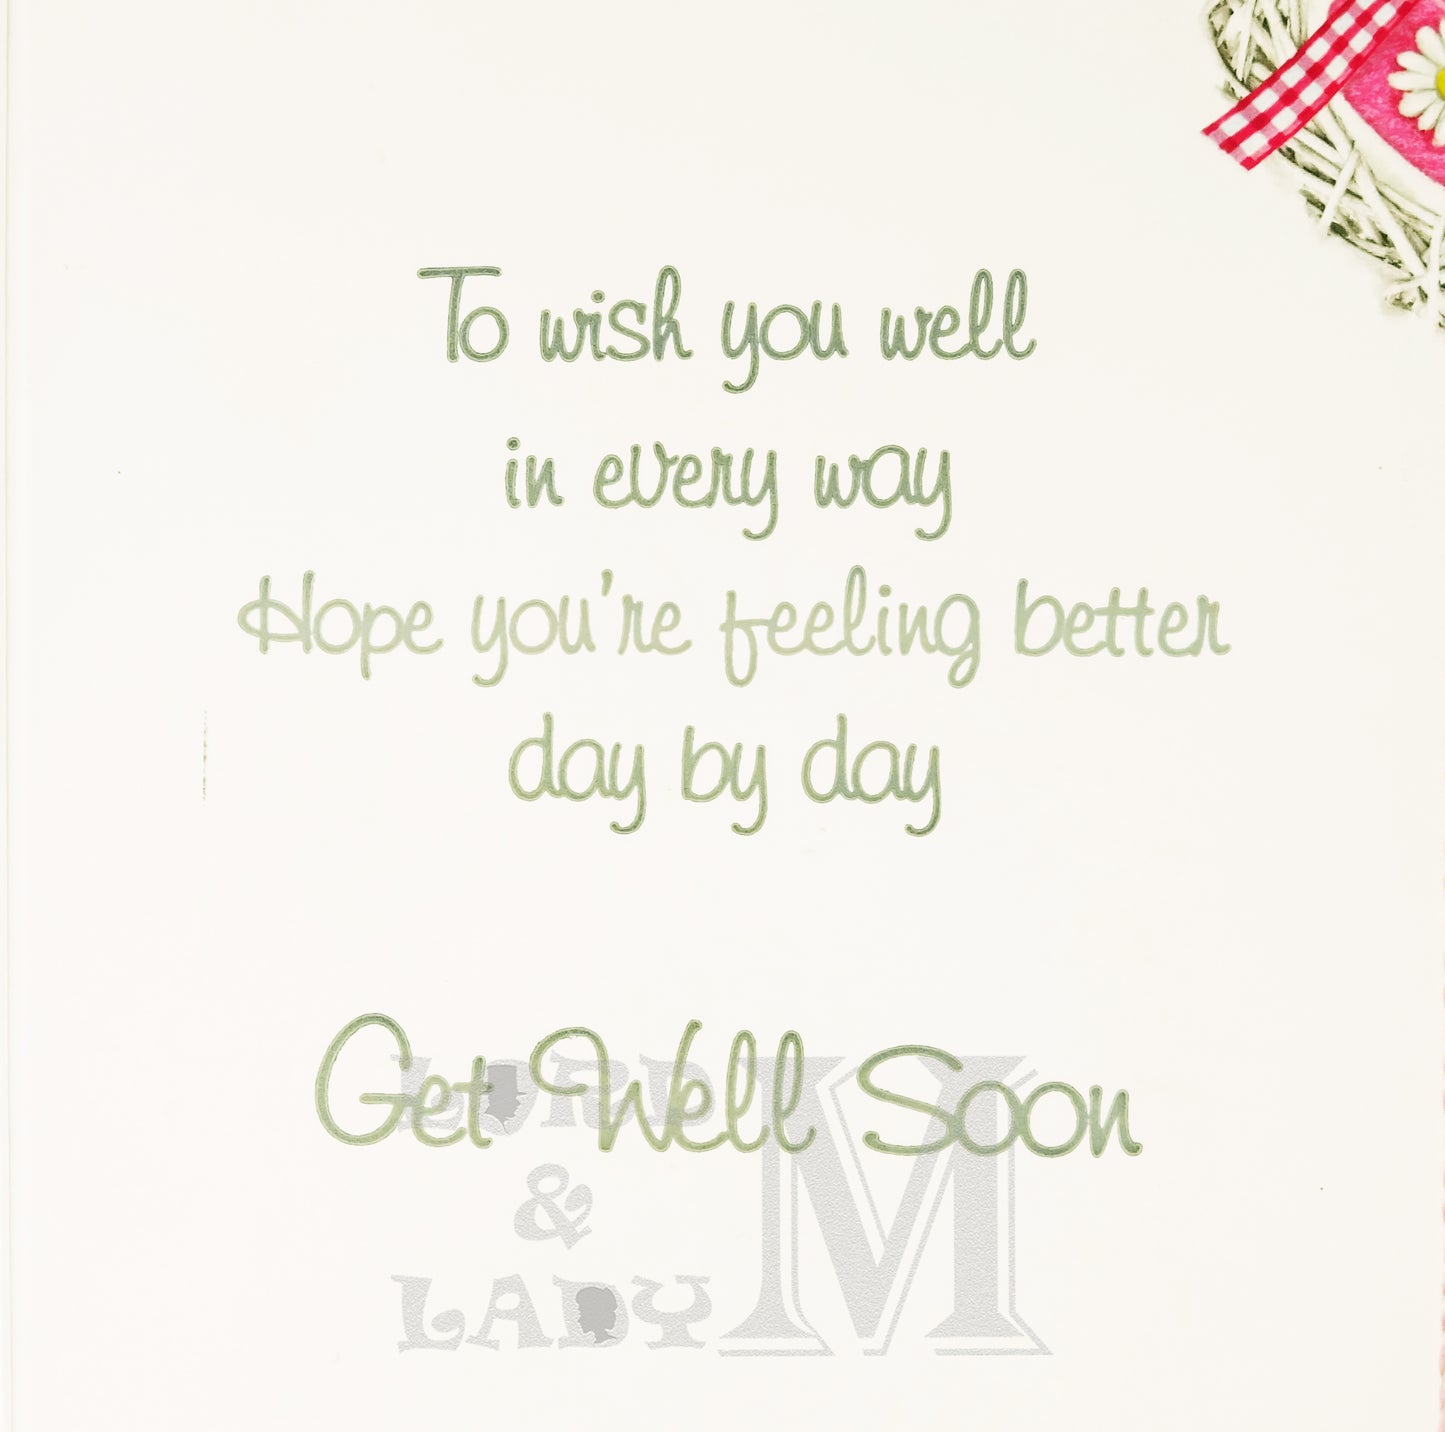 19cm - Get Well Soon Just For You! - CWH